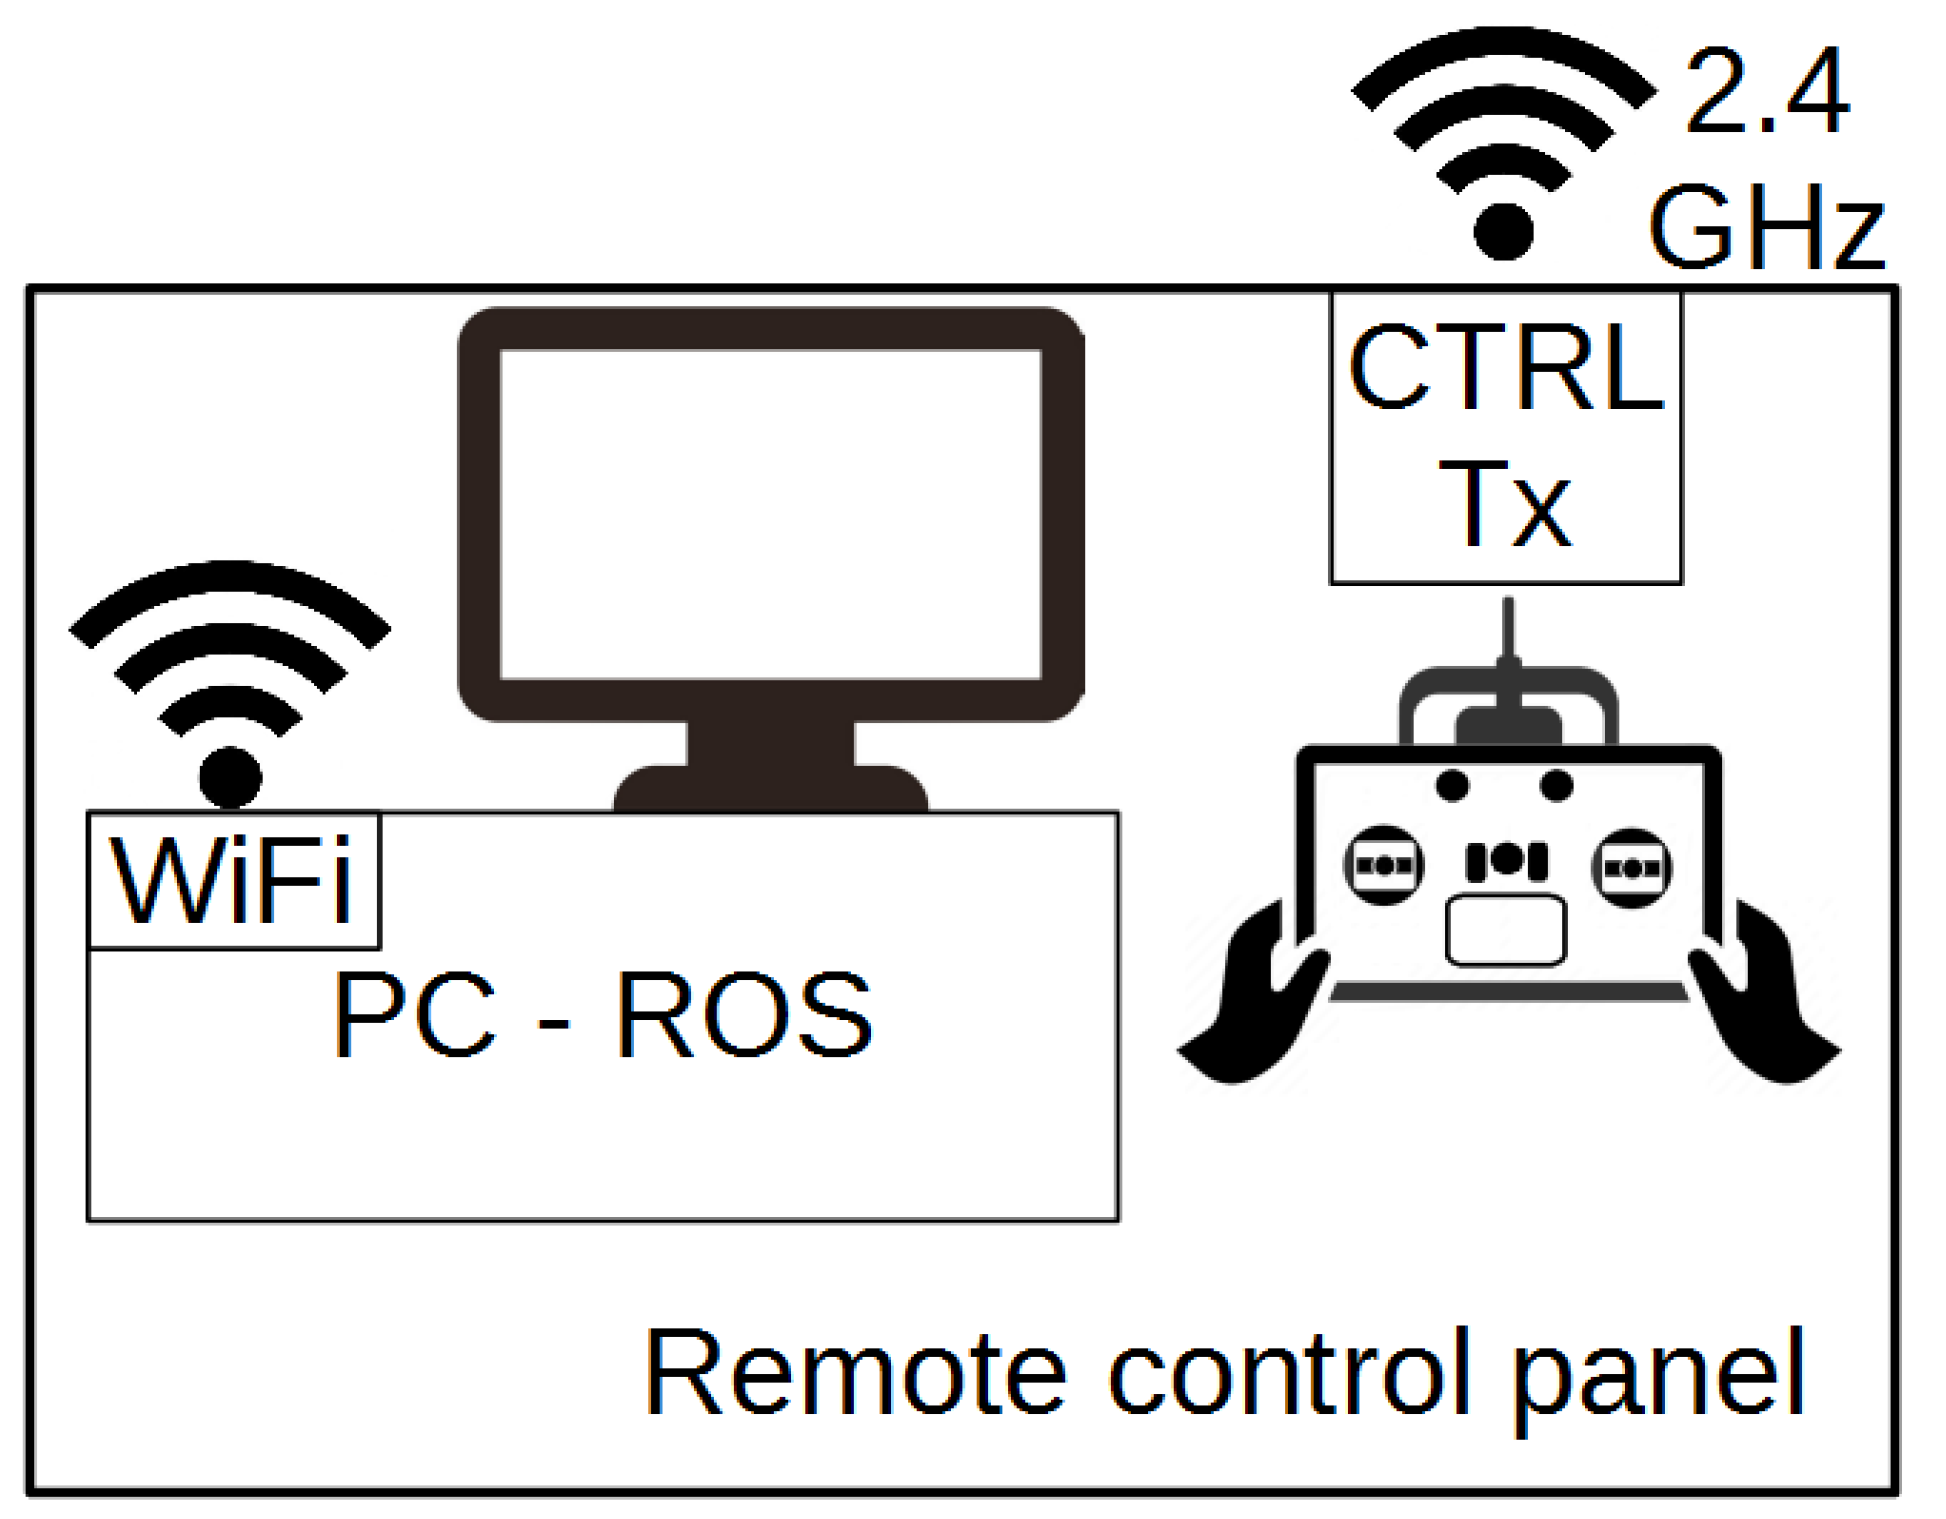 The remote control panel of mobile robot